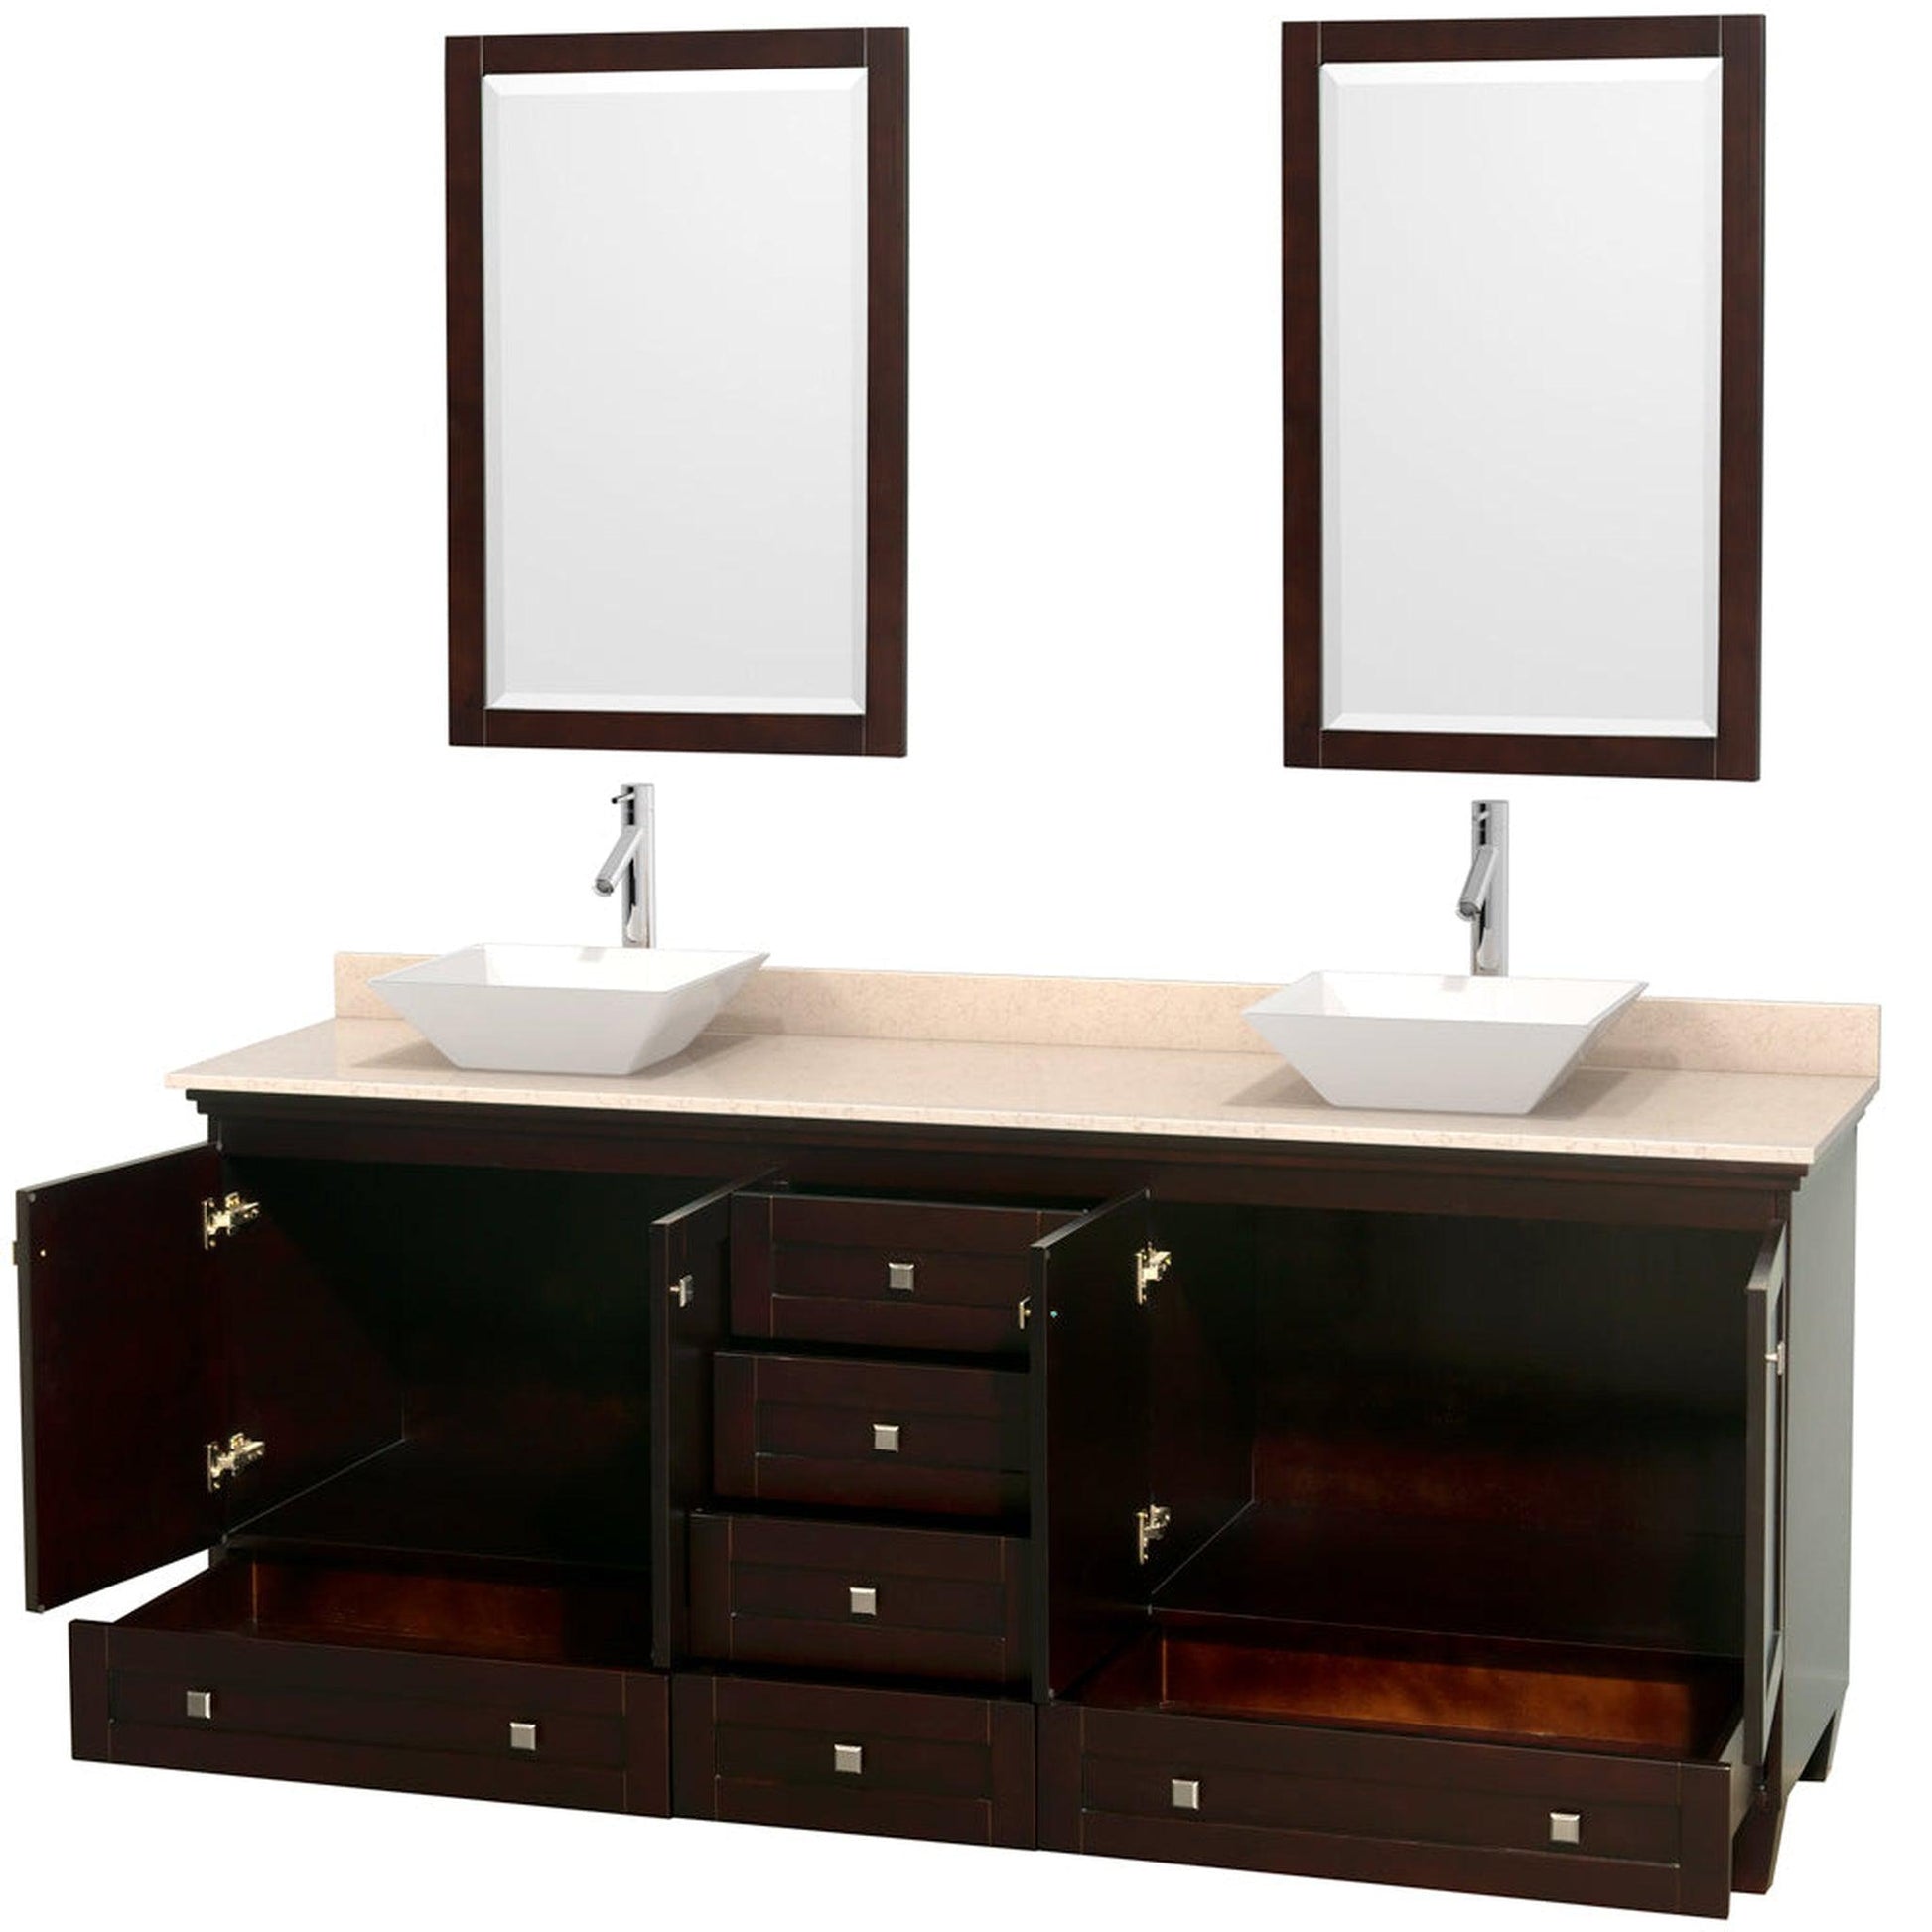 Wyndham Collection Acclaim 80" Double Bathroom Vanity in Espresso With Ivory Marble Countertop, Pyra White Porcelain Sink & 24" Mirror